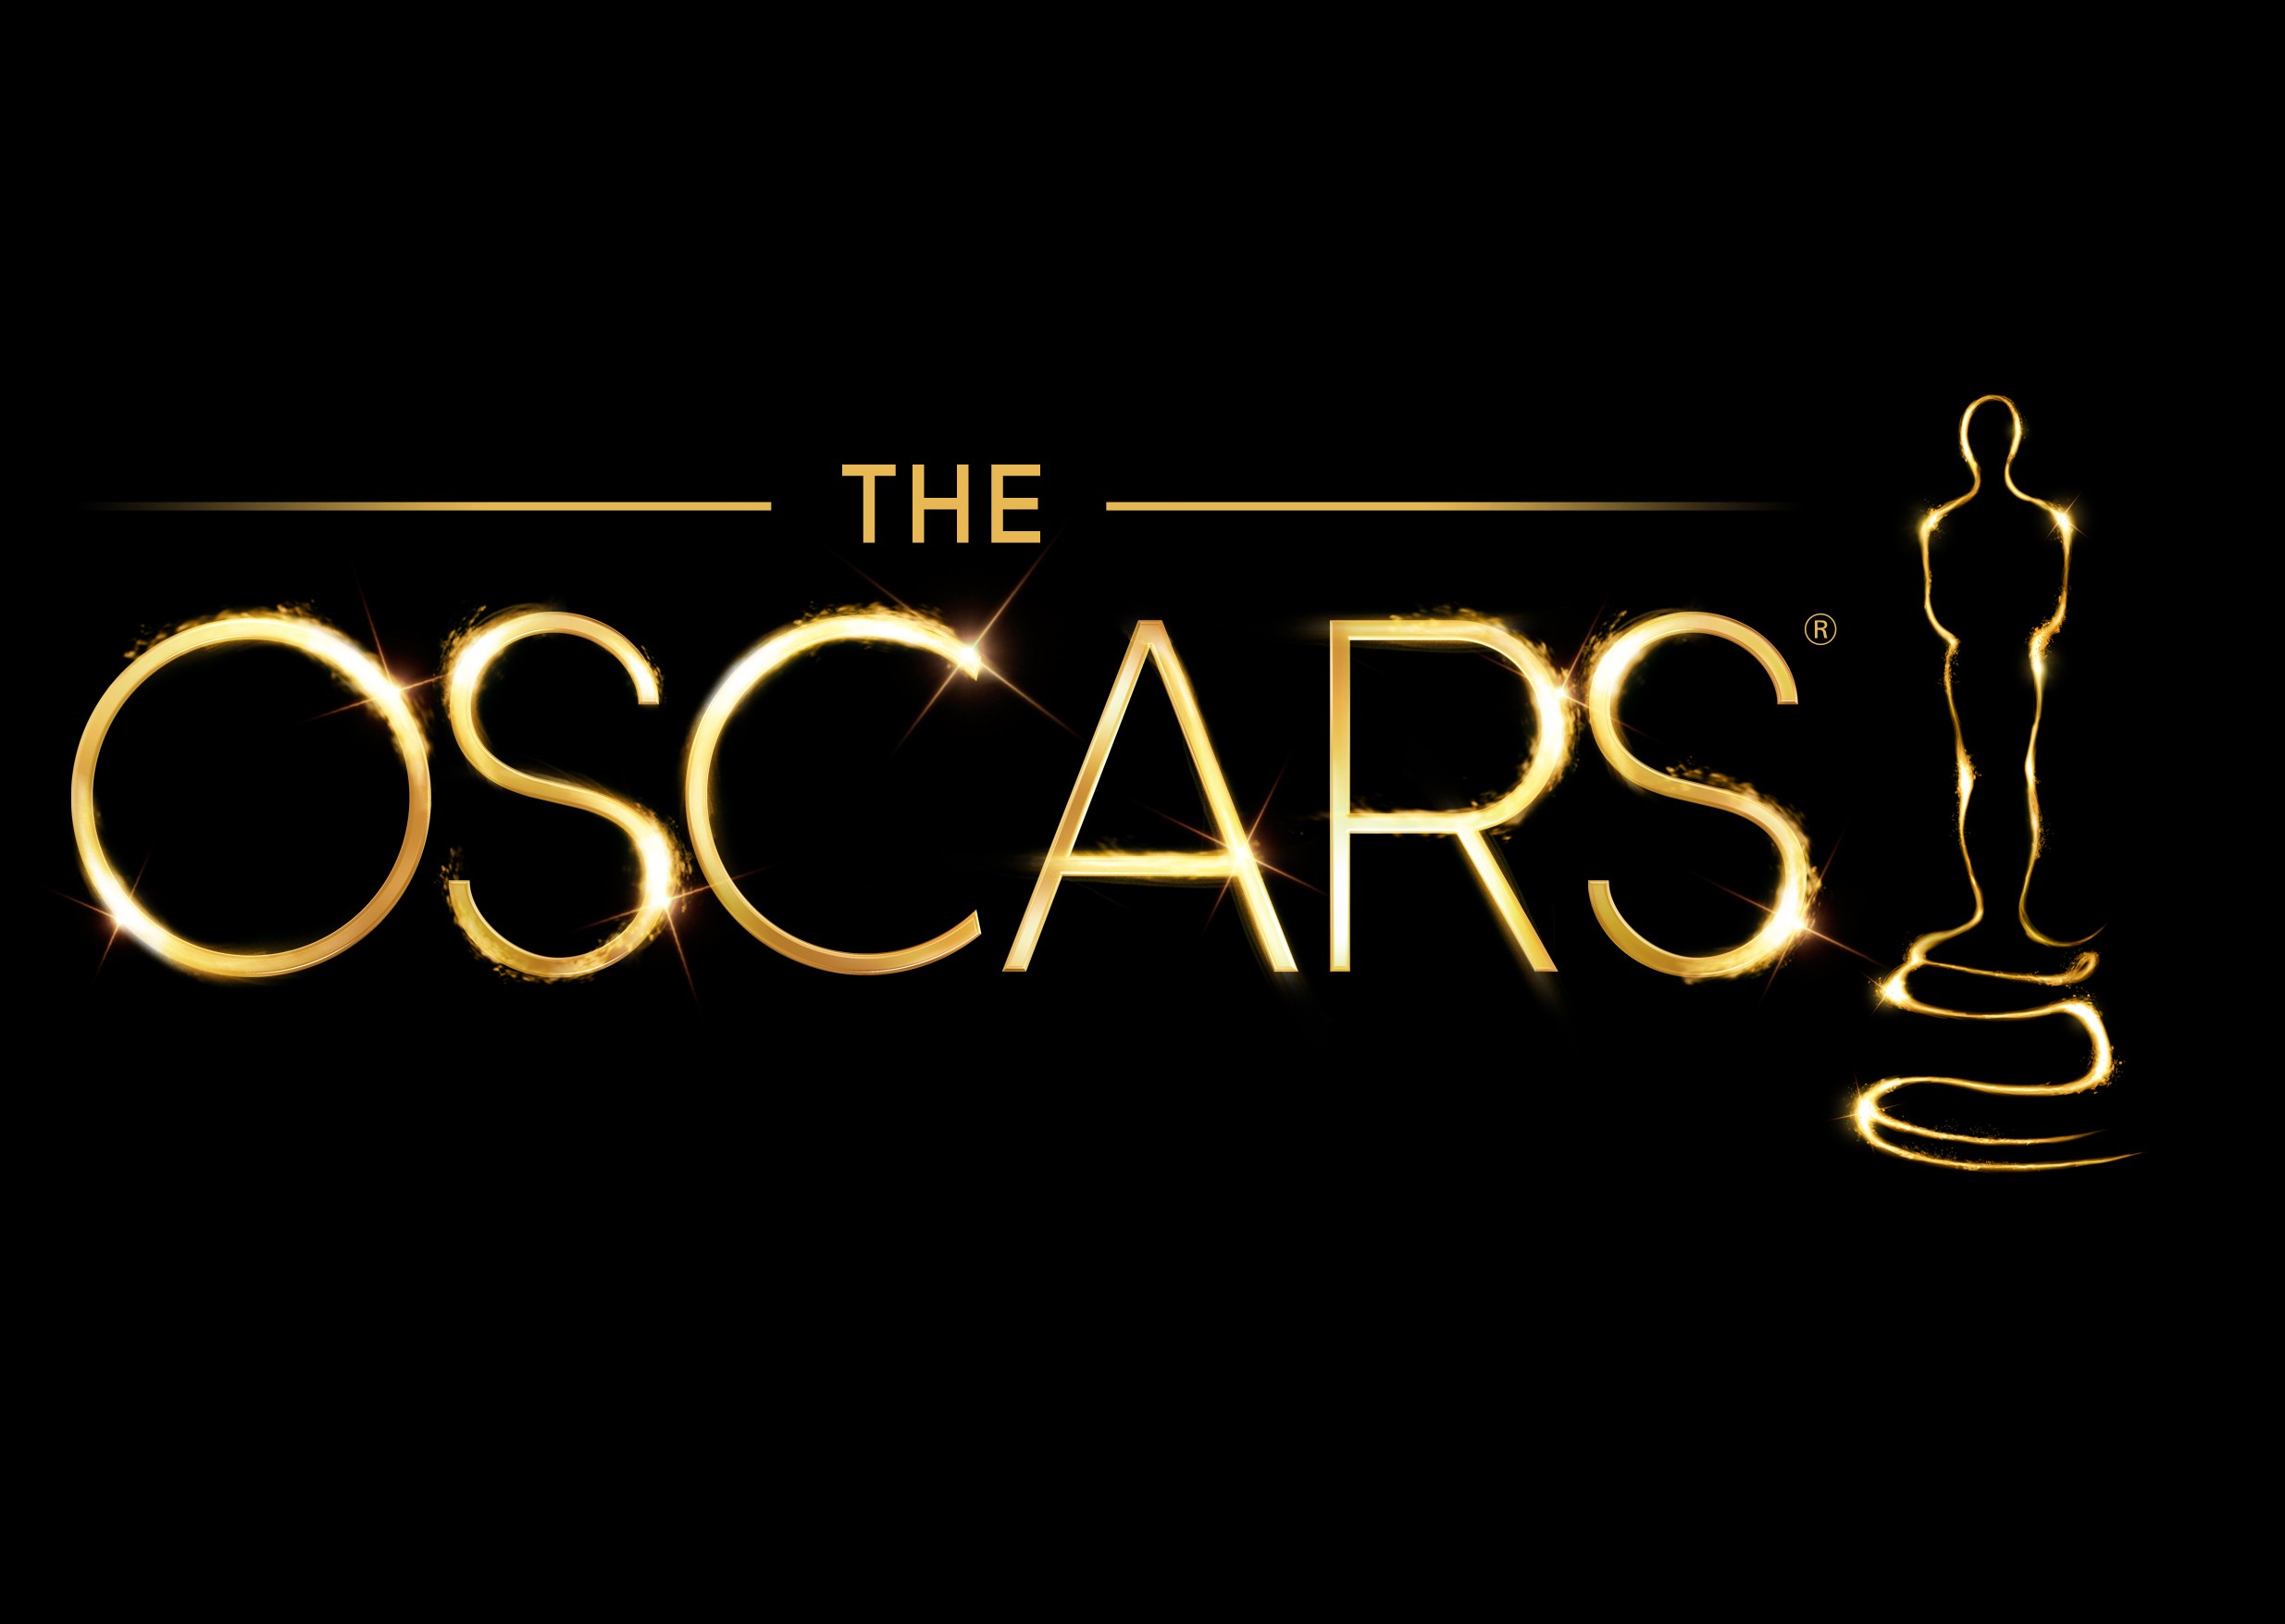 Oscars-2015-Nominations-Announced-Live-Stream-470108-2